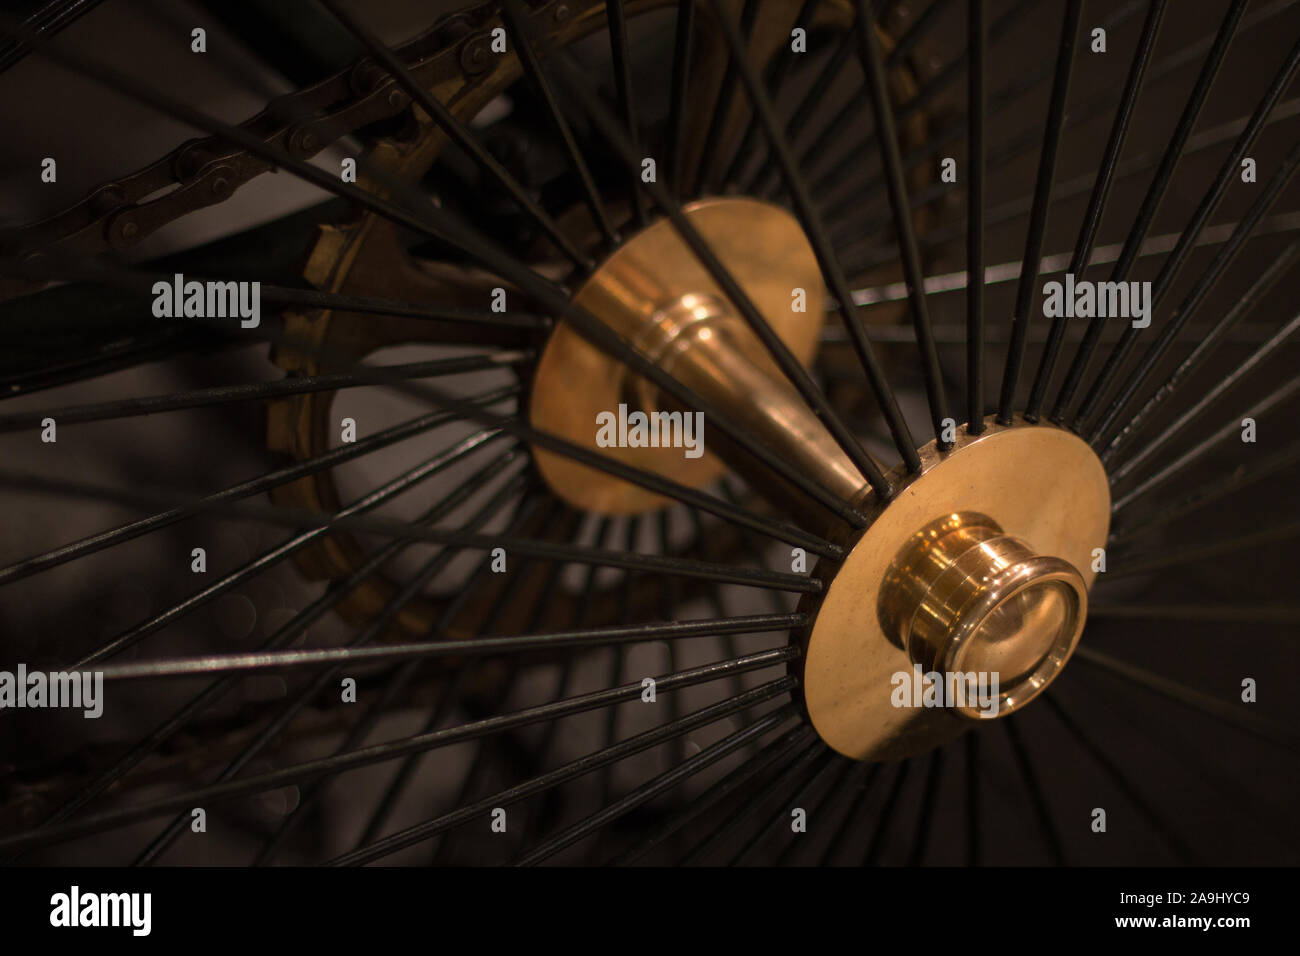 Close up view of black steel and brass wheel spoke on an antique carriage. Stock Photo